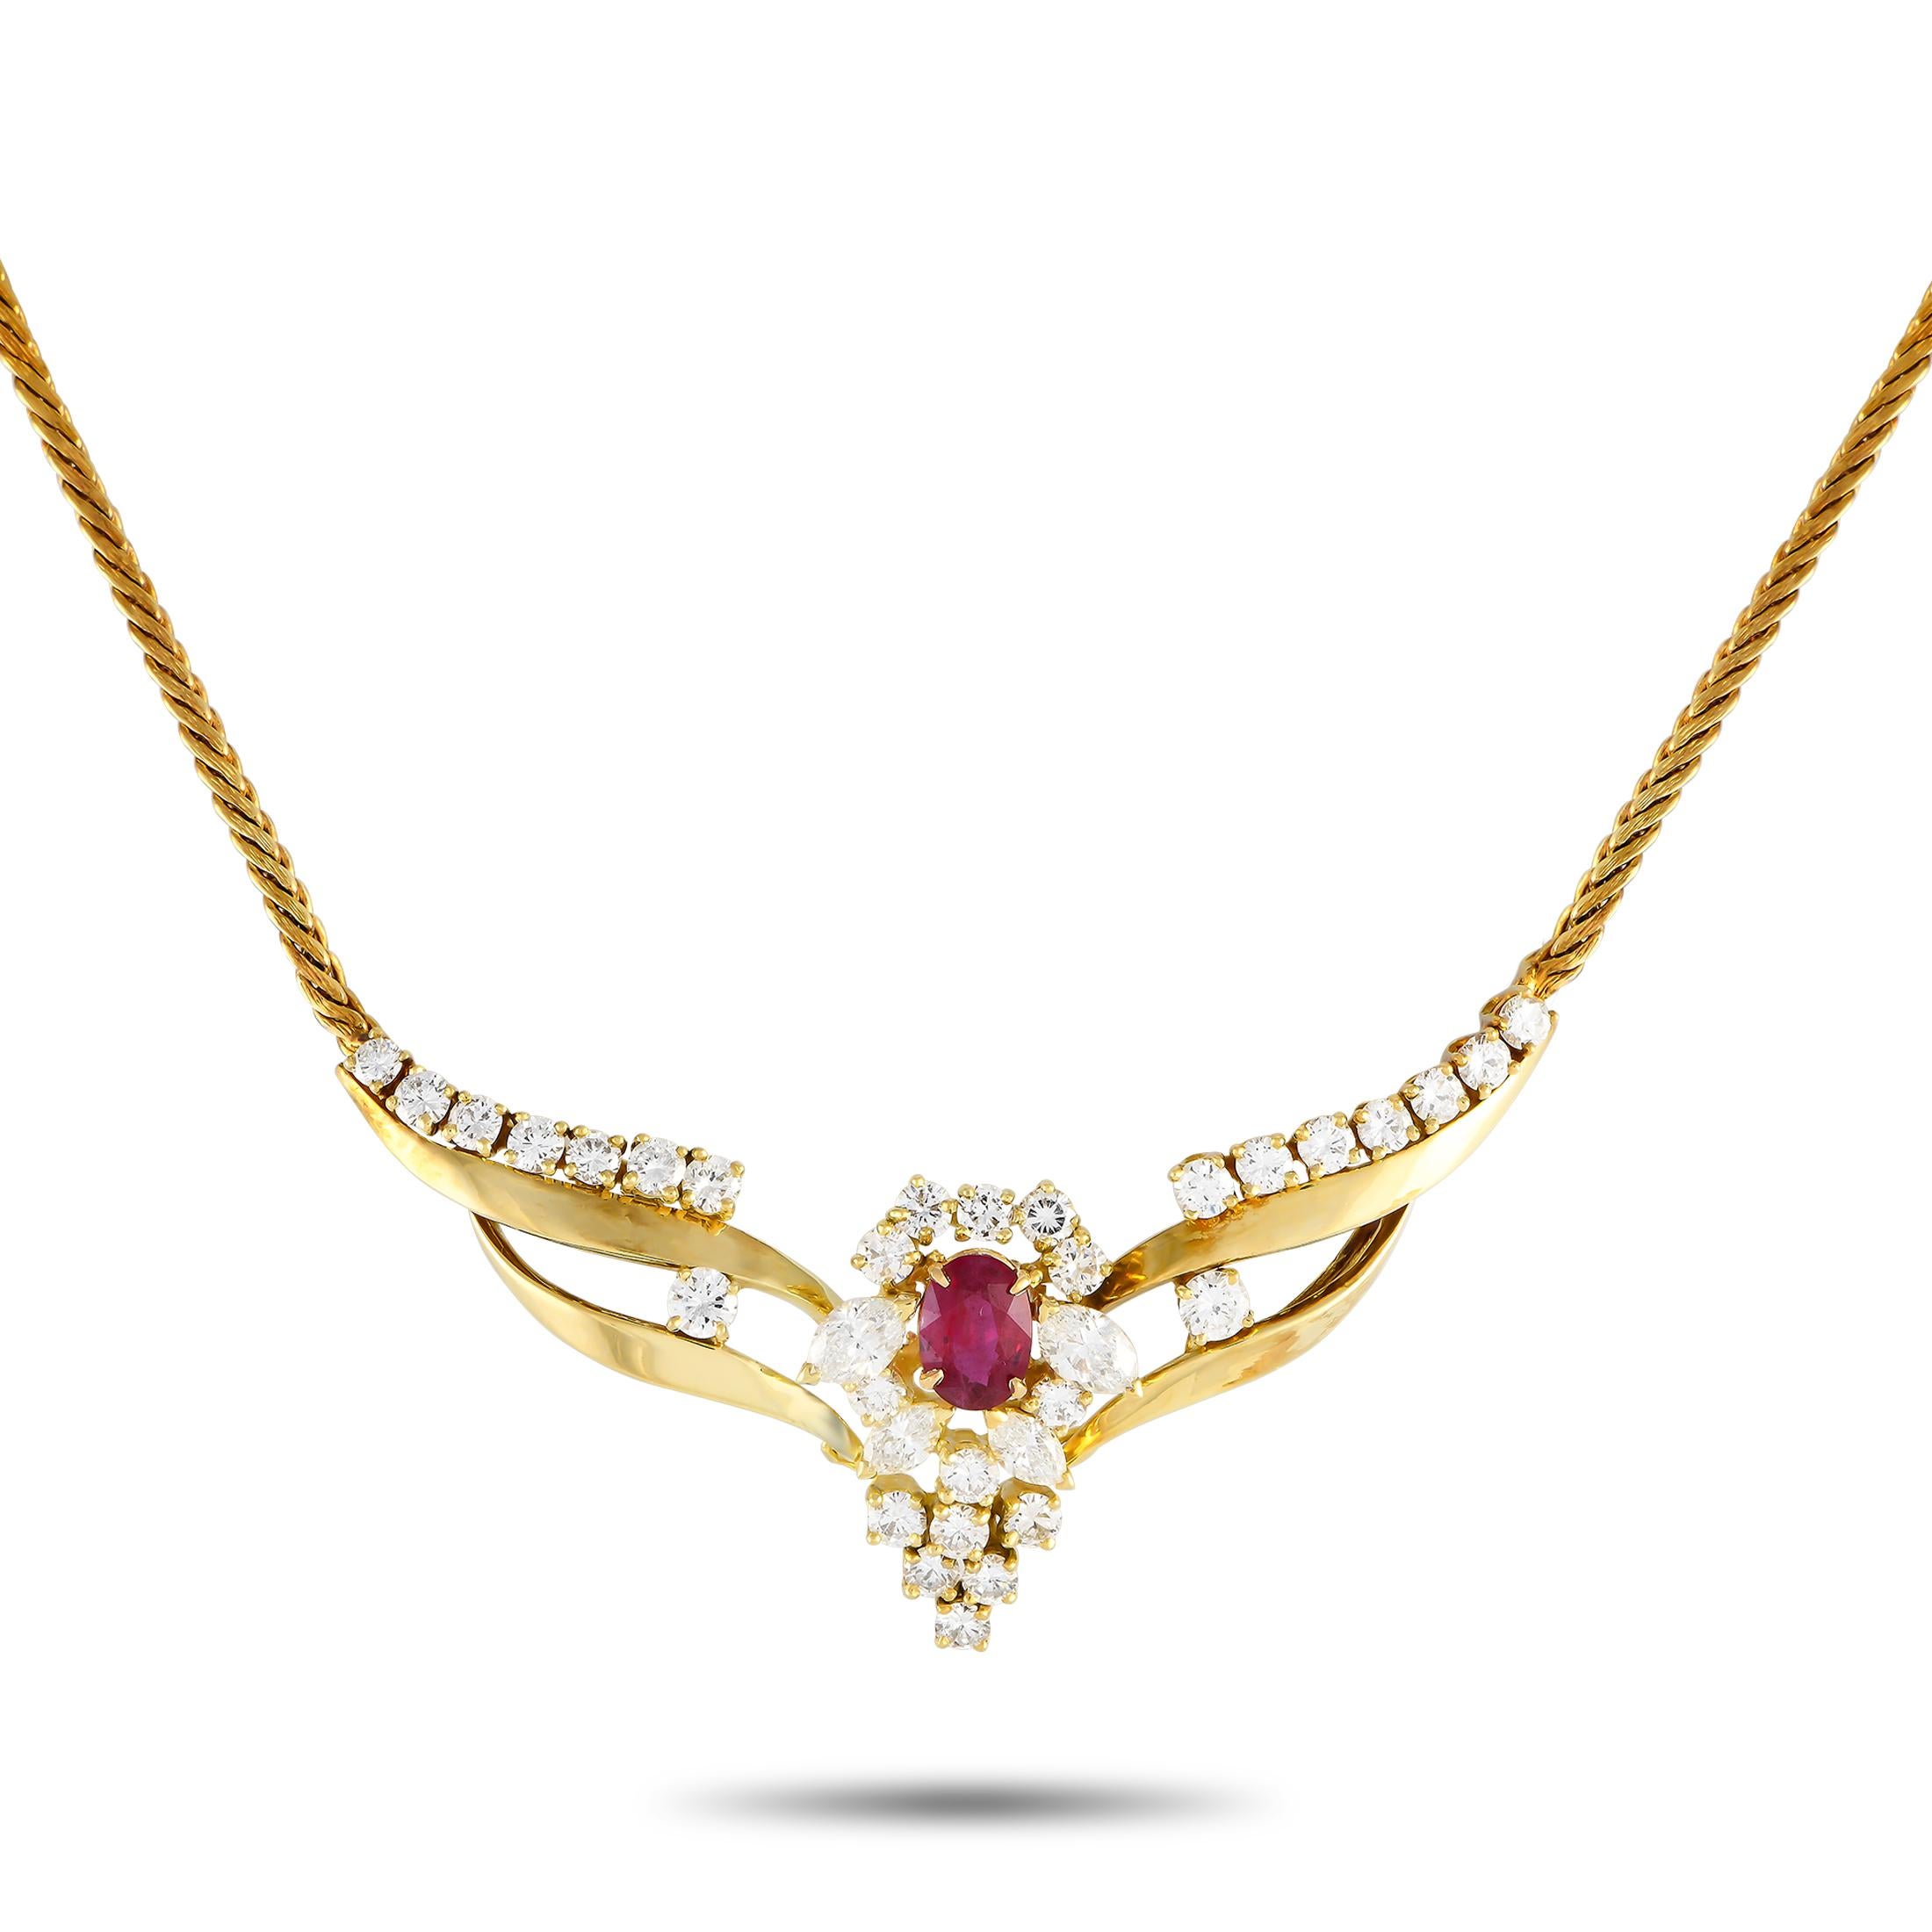 14K Yellow Gold 4.0ct Diamond and Burma Heated Ruby Necklace MF31-012324 In Excellent Condition For Sale In Southampton, PA